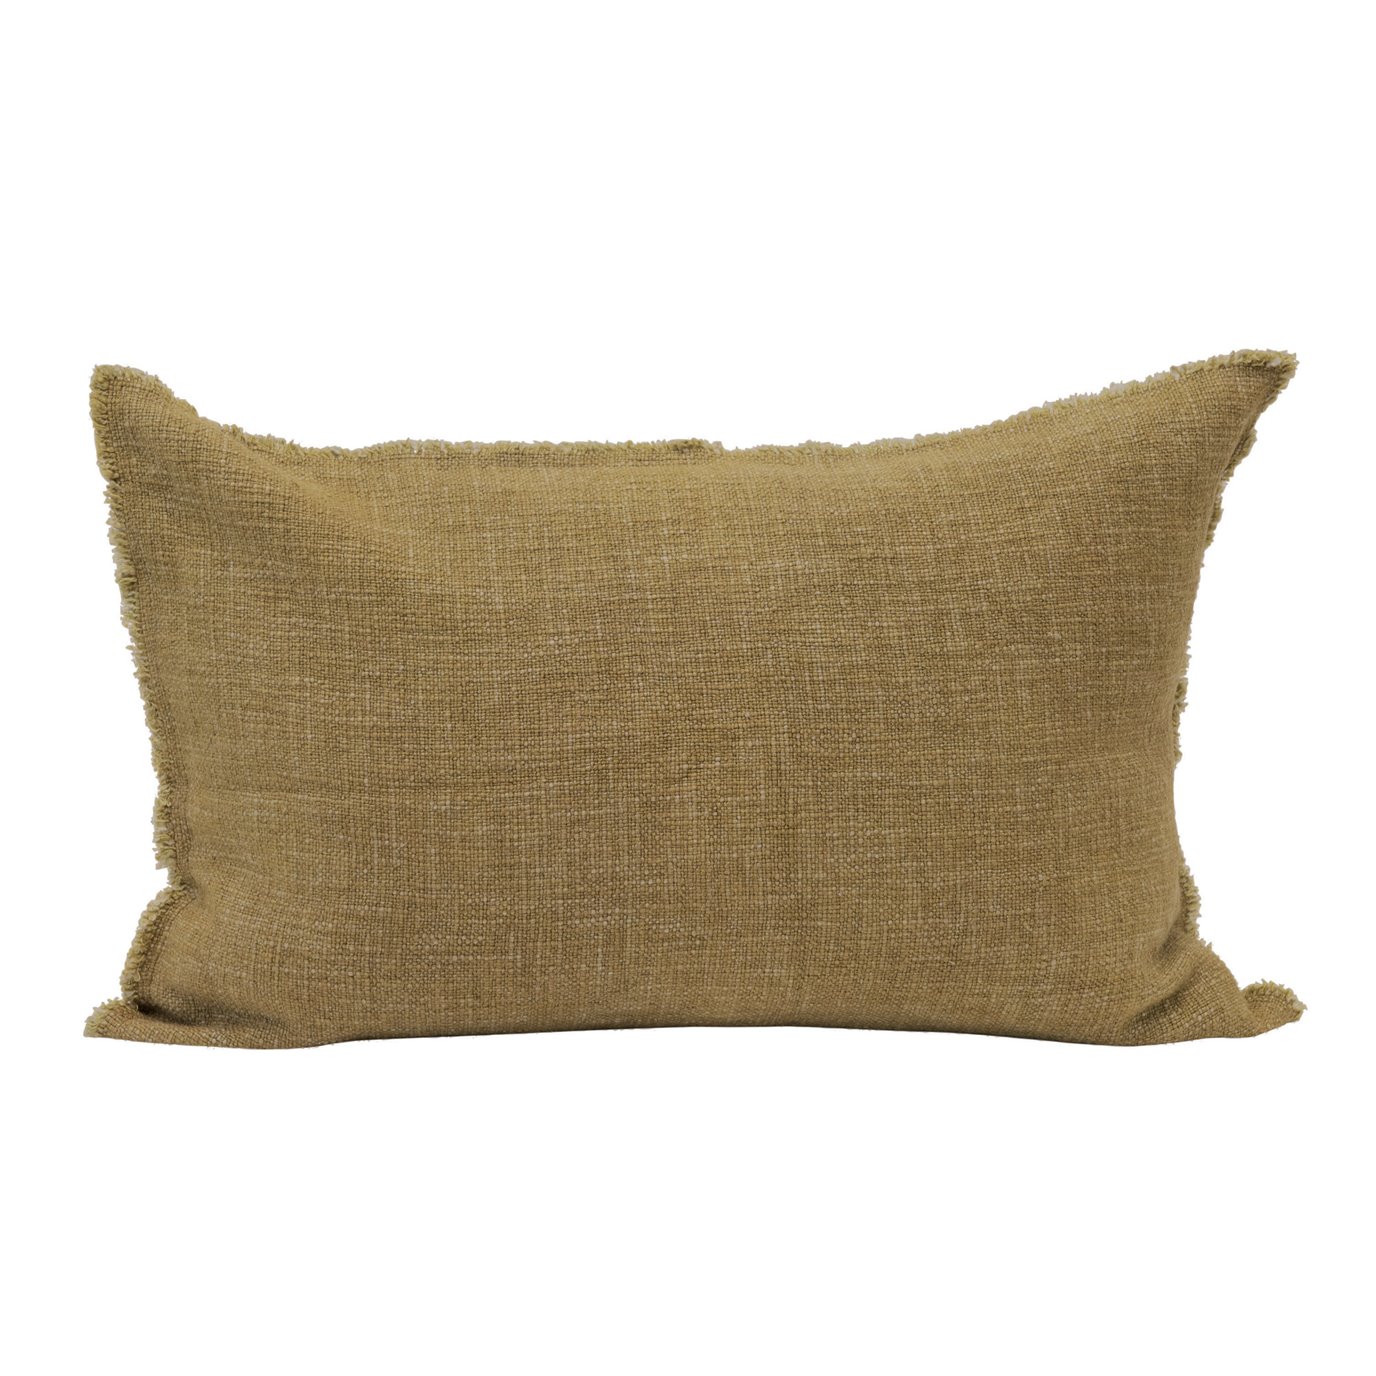 Linen Blend Lumbar Pillow with Frayed Edges, Olive Color